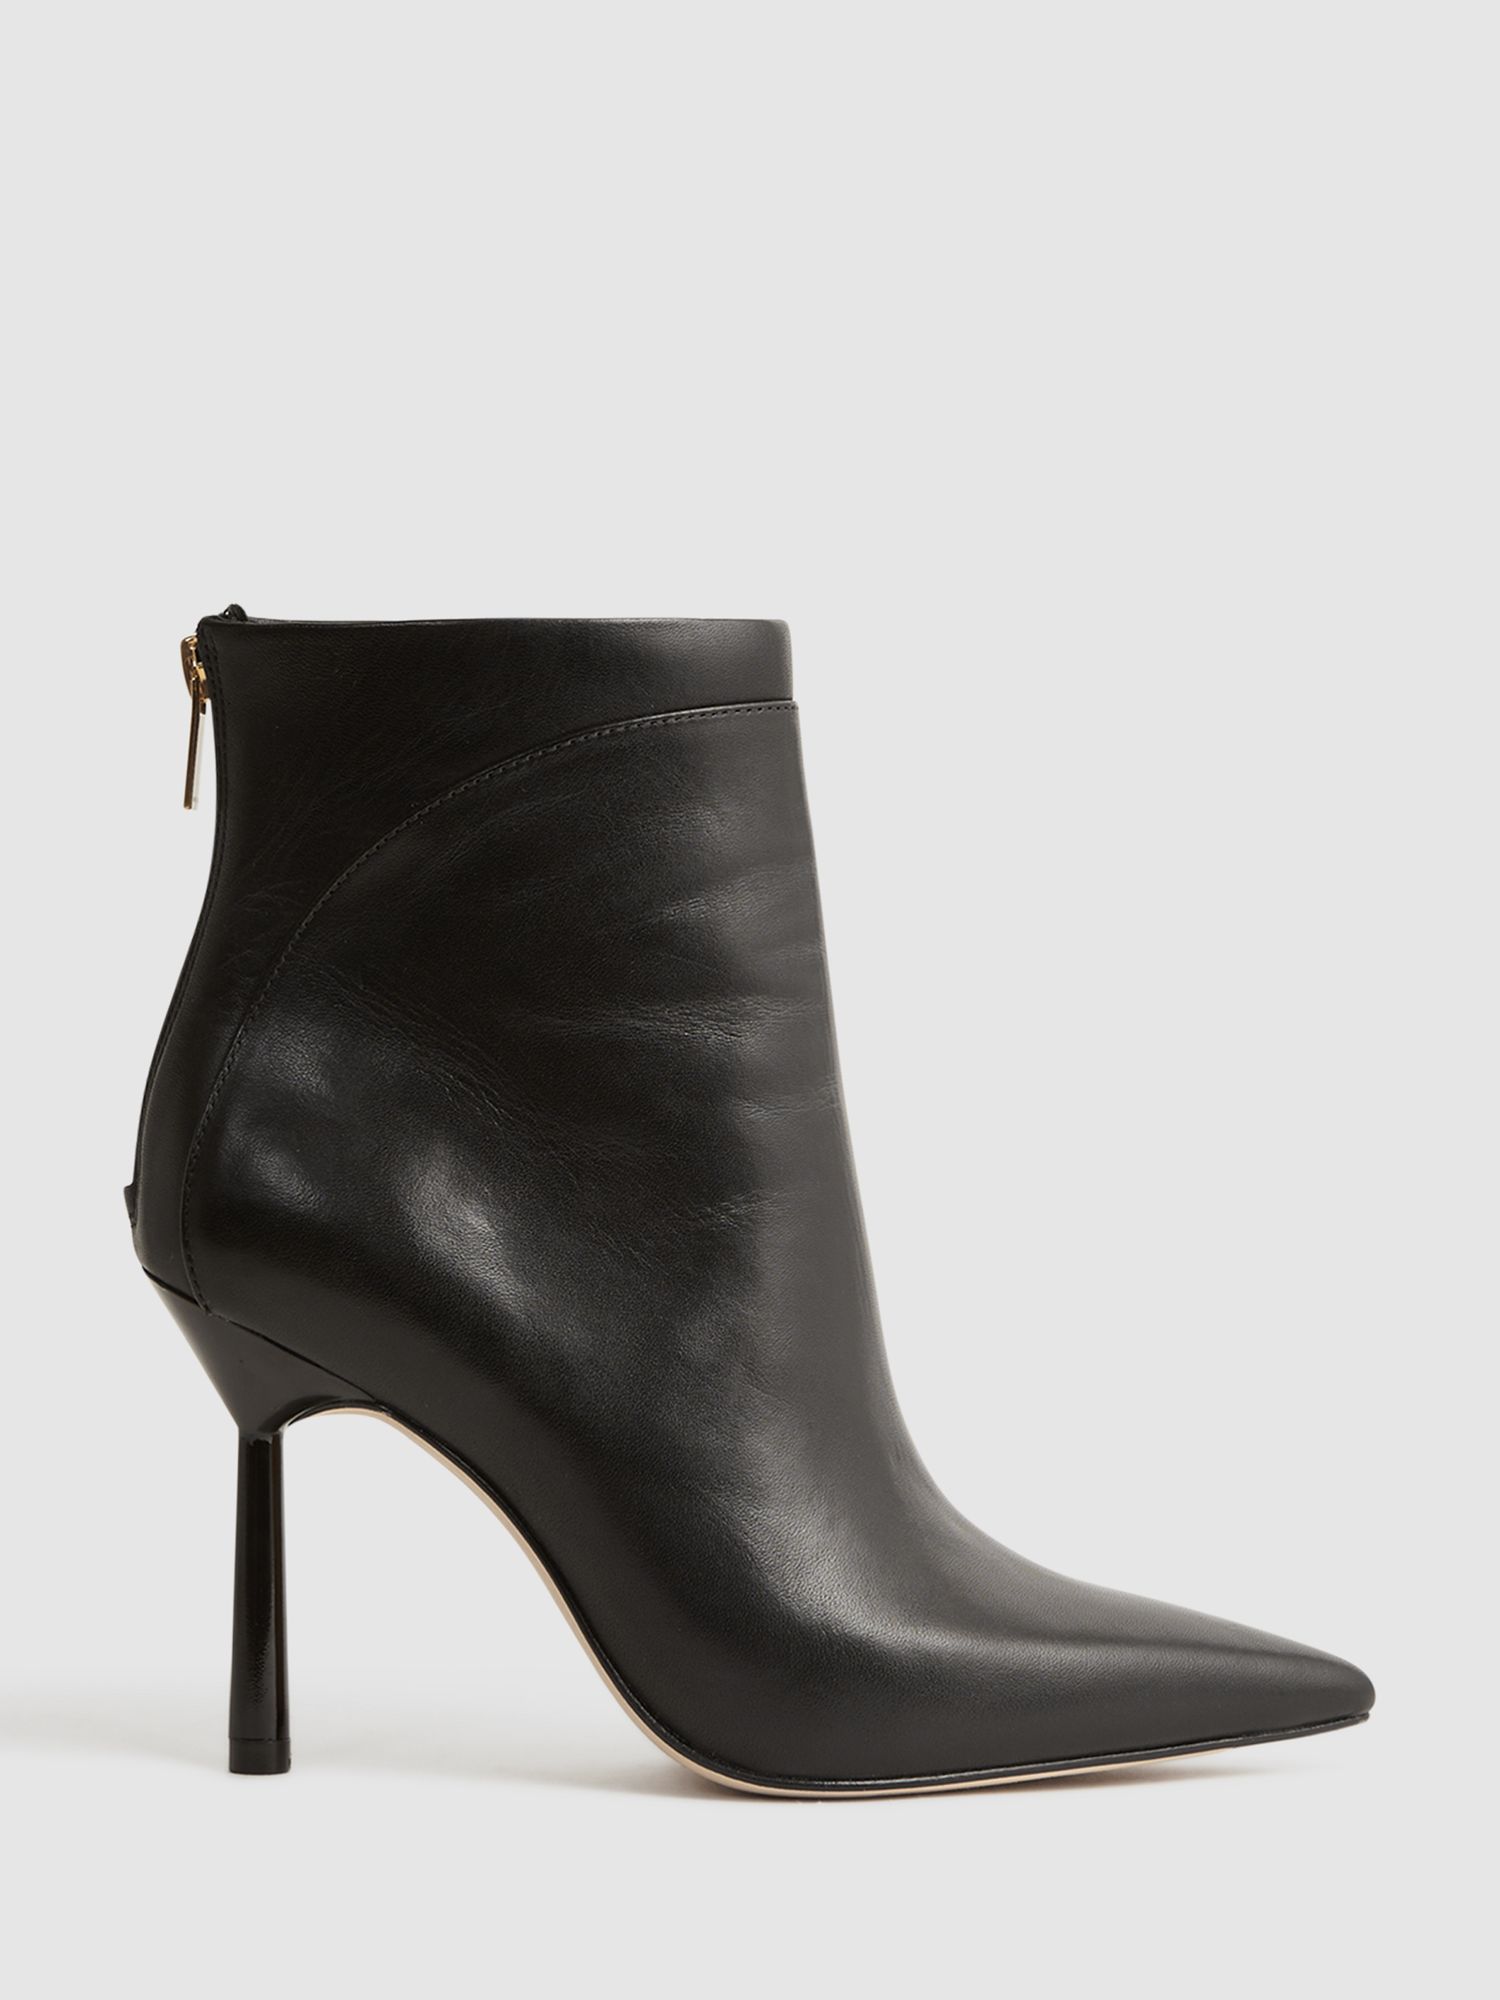 Reiss Lyra Signature Leather Stiletto Ankle Boots, Black at John Lewis ...